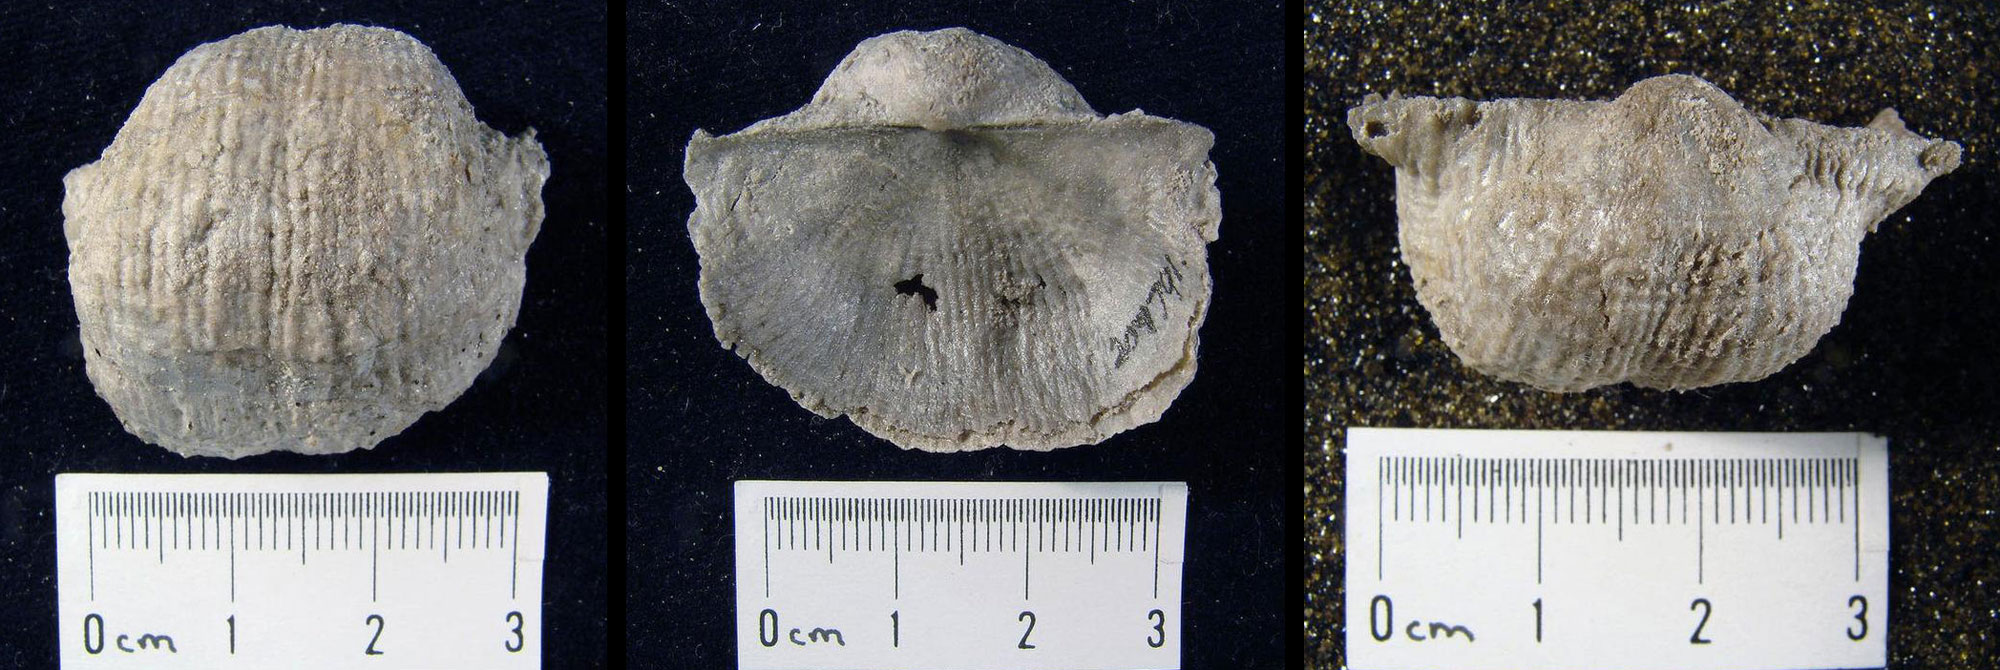 Image made up of photographs of a brachiopod shell from the Mississippian Arco Hills Formation of Idaho in three views, from above, from below, and from the hinge (with shell upside down). The shell is flat on the bottom and strongly curved on the top. The upper valve has fine parallel ridges, with lower valve even finer parallel ridges. The shell is a little over 3 centimeters wide.